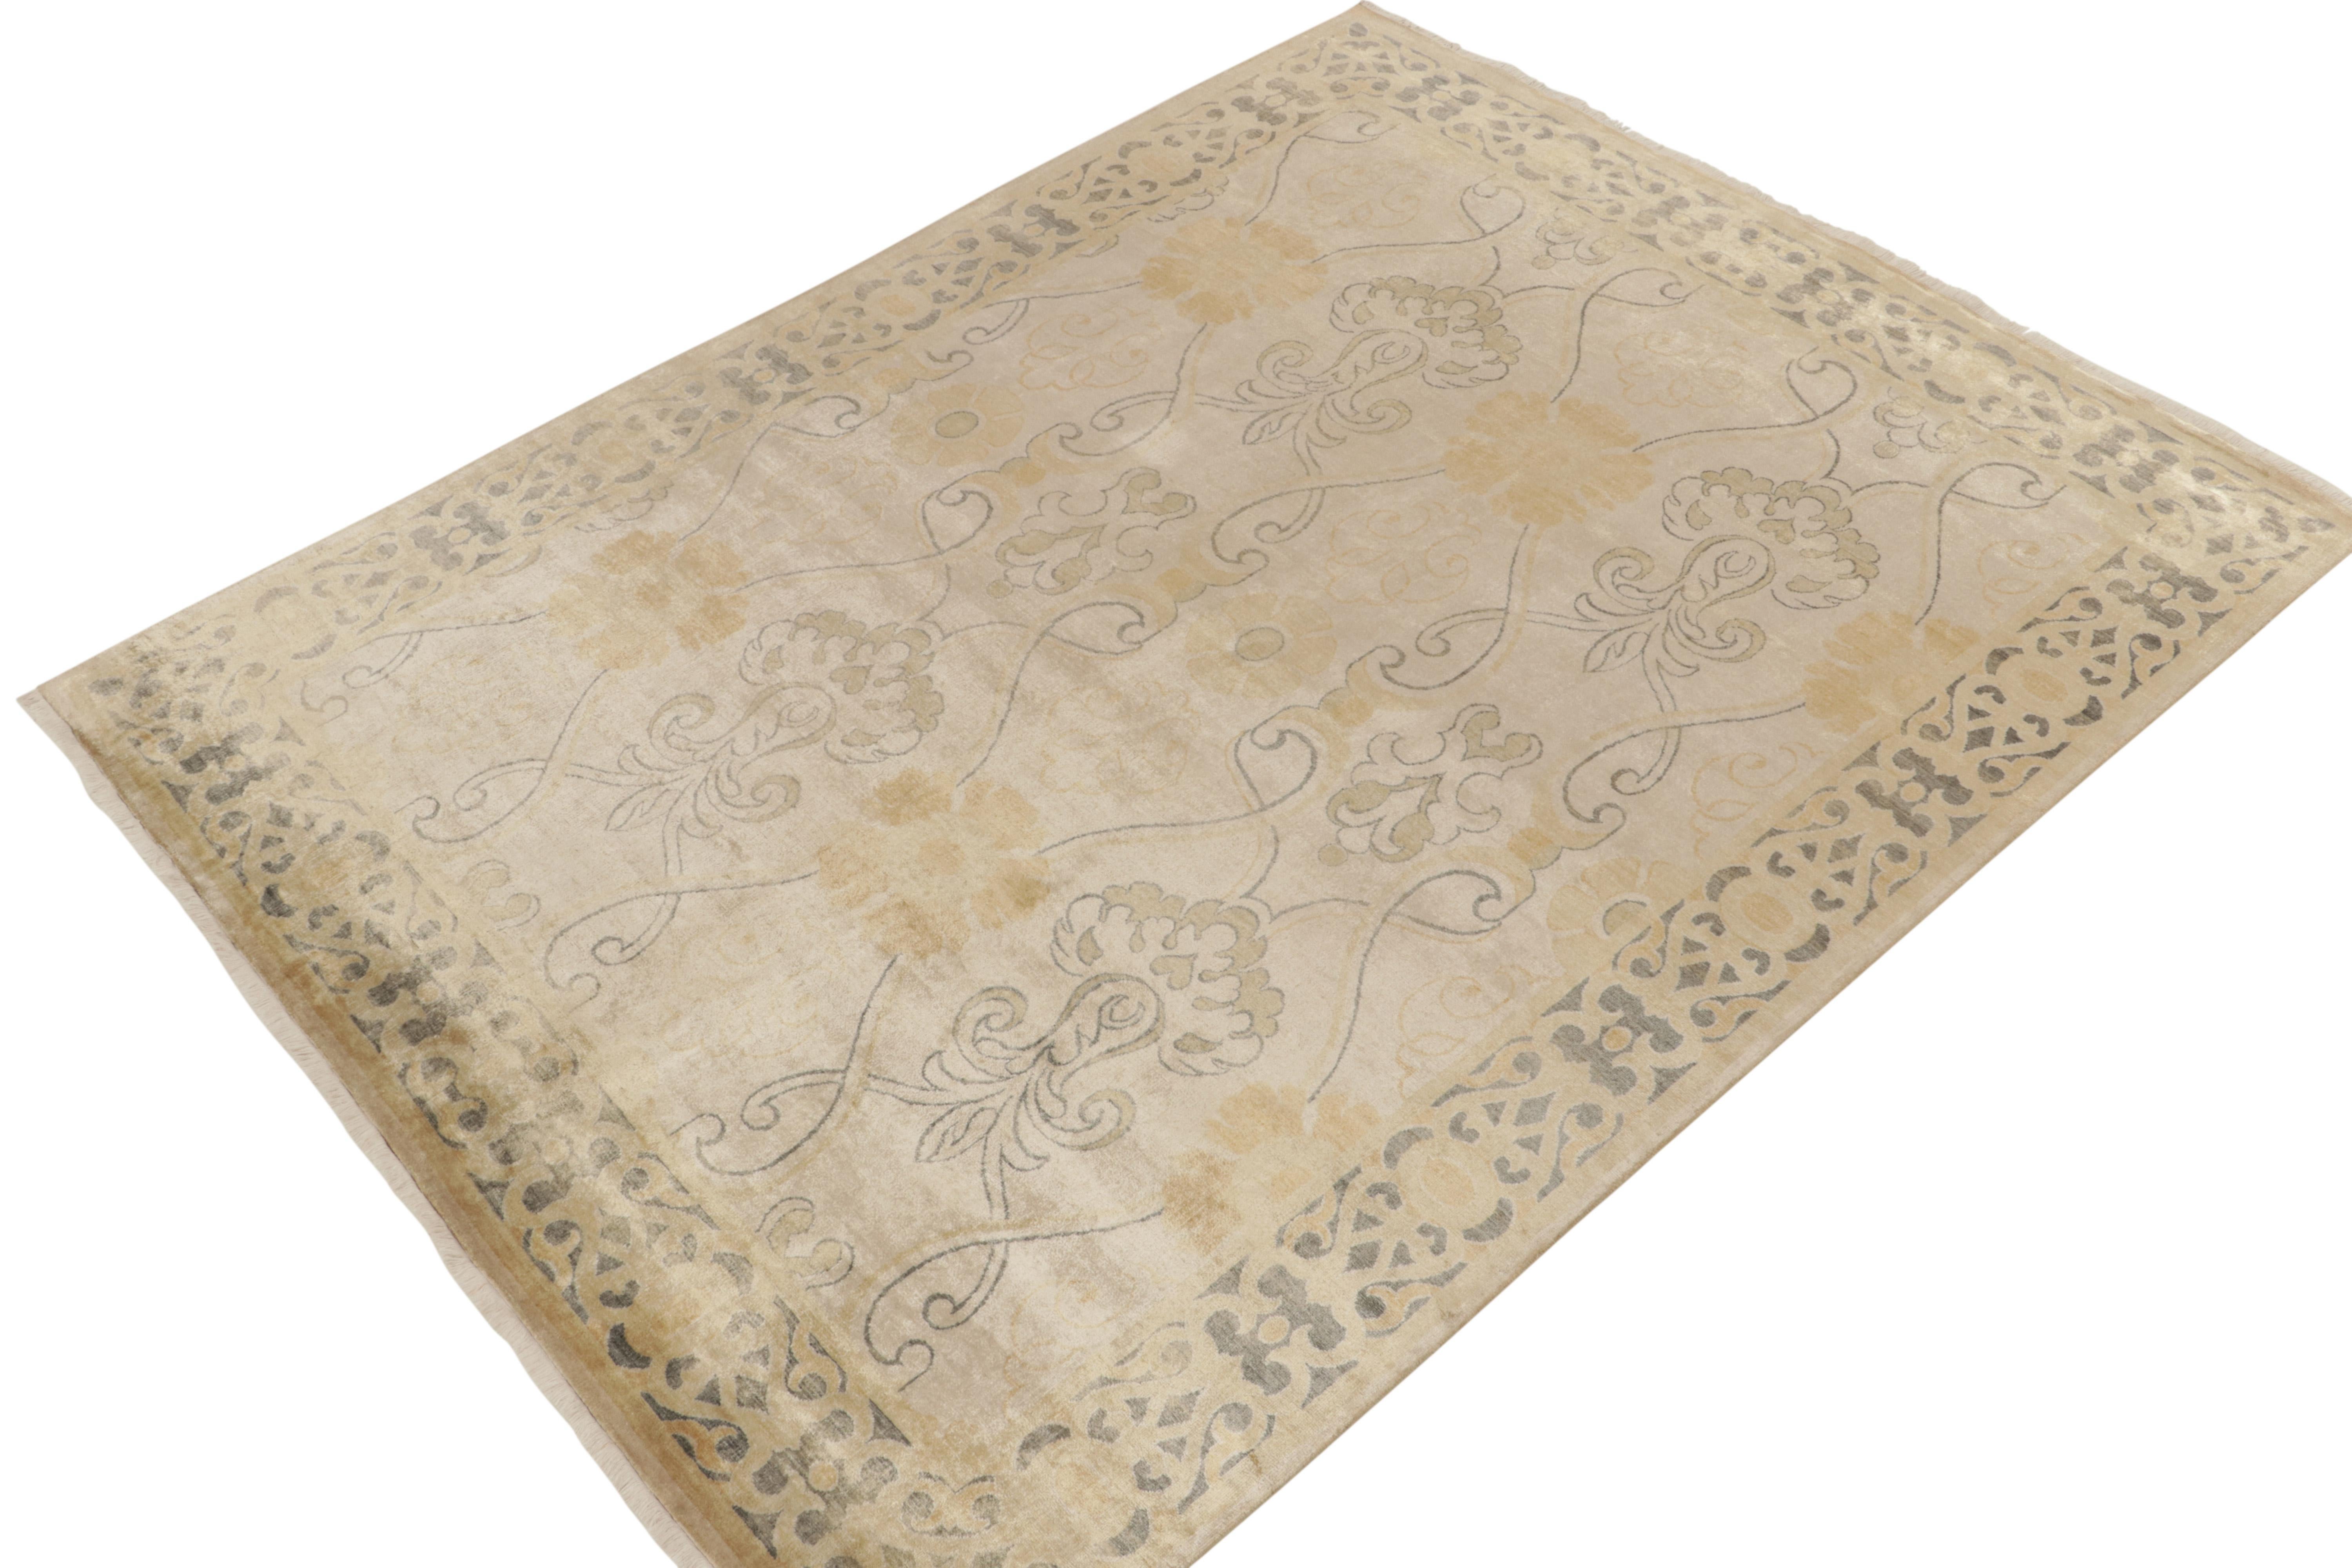 Hand-knotted in luxurious silk, this 8x10 from our Modern Classics collection marks a unique take on antique Art Nouveau rug styles. 

On the Design: A gracious scale hosts curvaceous trellises and florals in the most elegant play of beige and gold